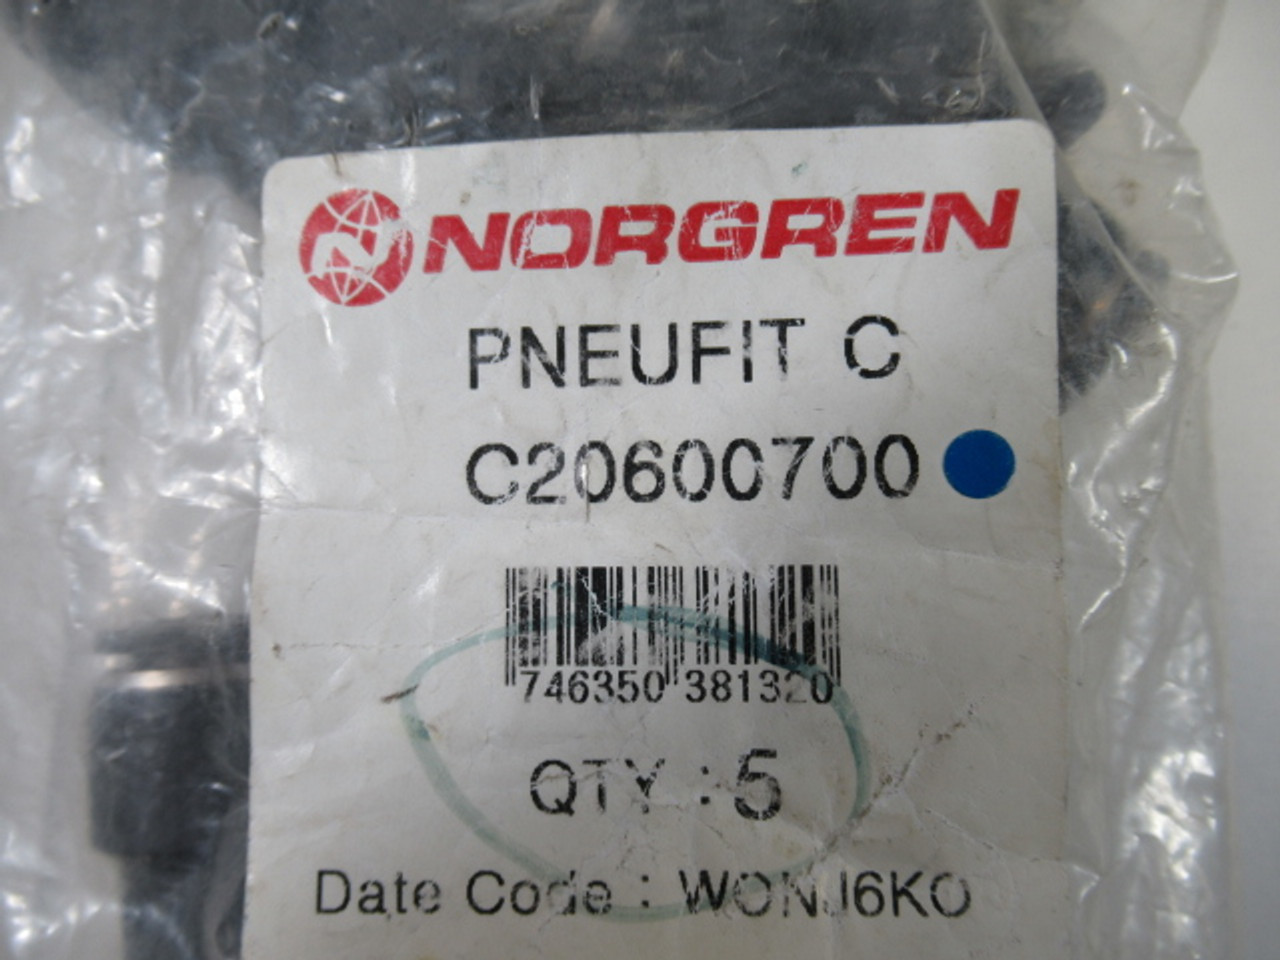 Norgren C20600700 Pneufit C Union T 1/2" Tube OD Lot of 5 ! NEW !